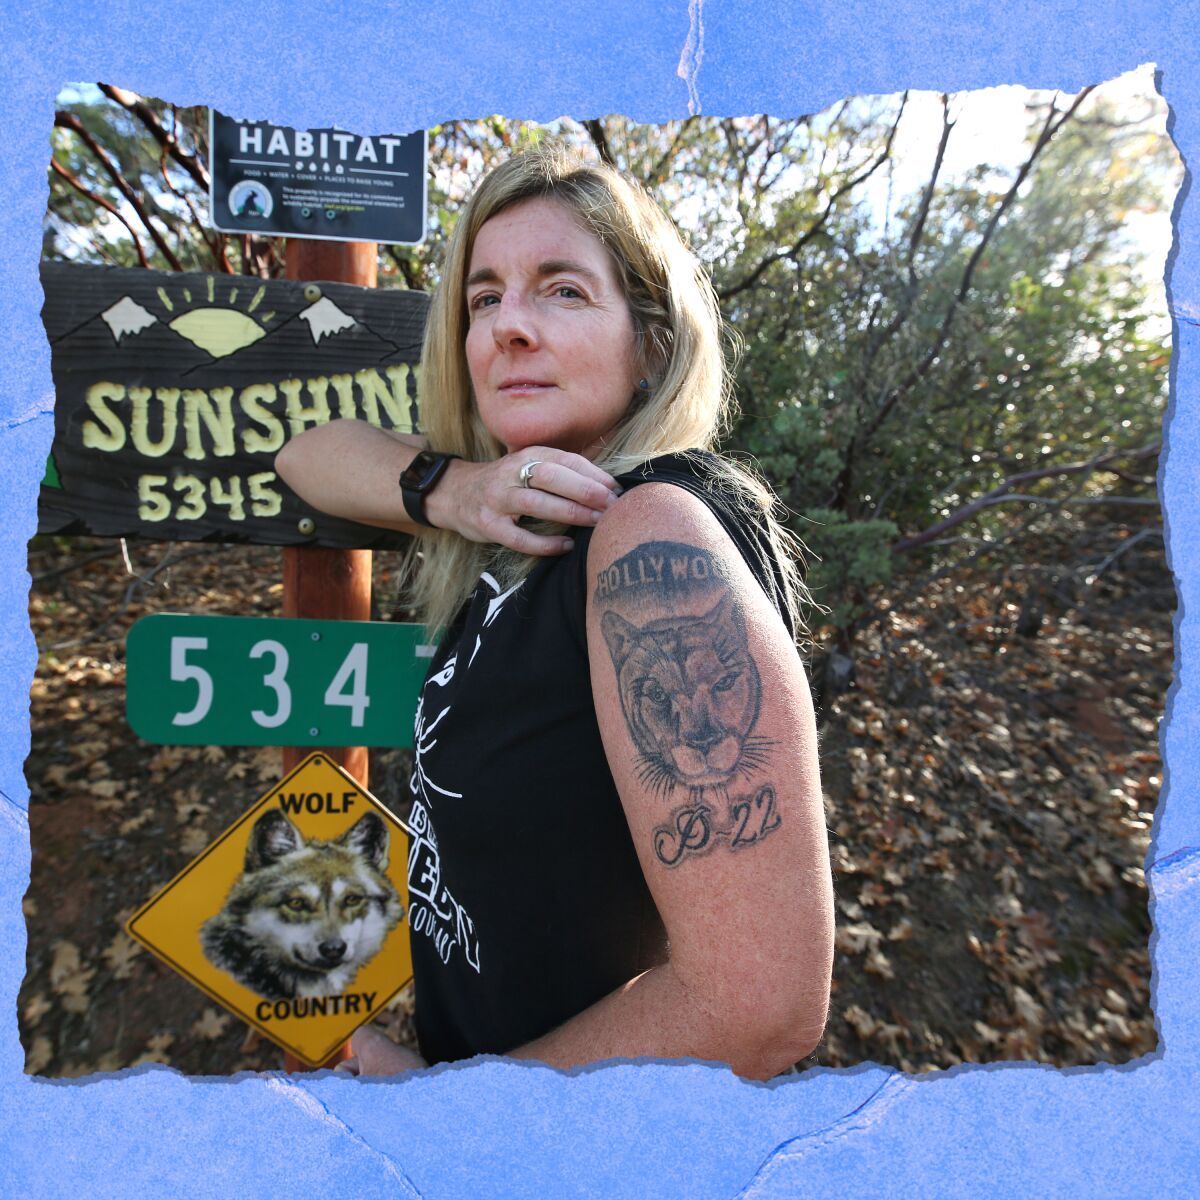 A woman shows off a tattoo on her upper arm of mountain lion P-22.